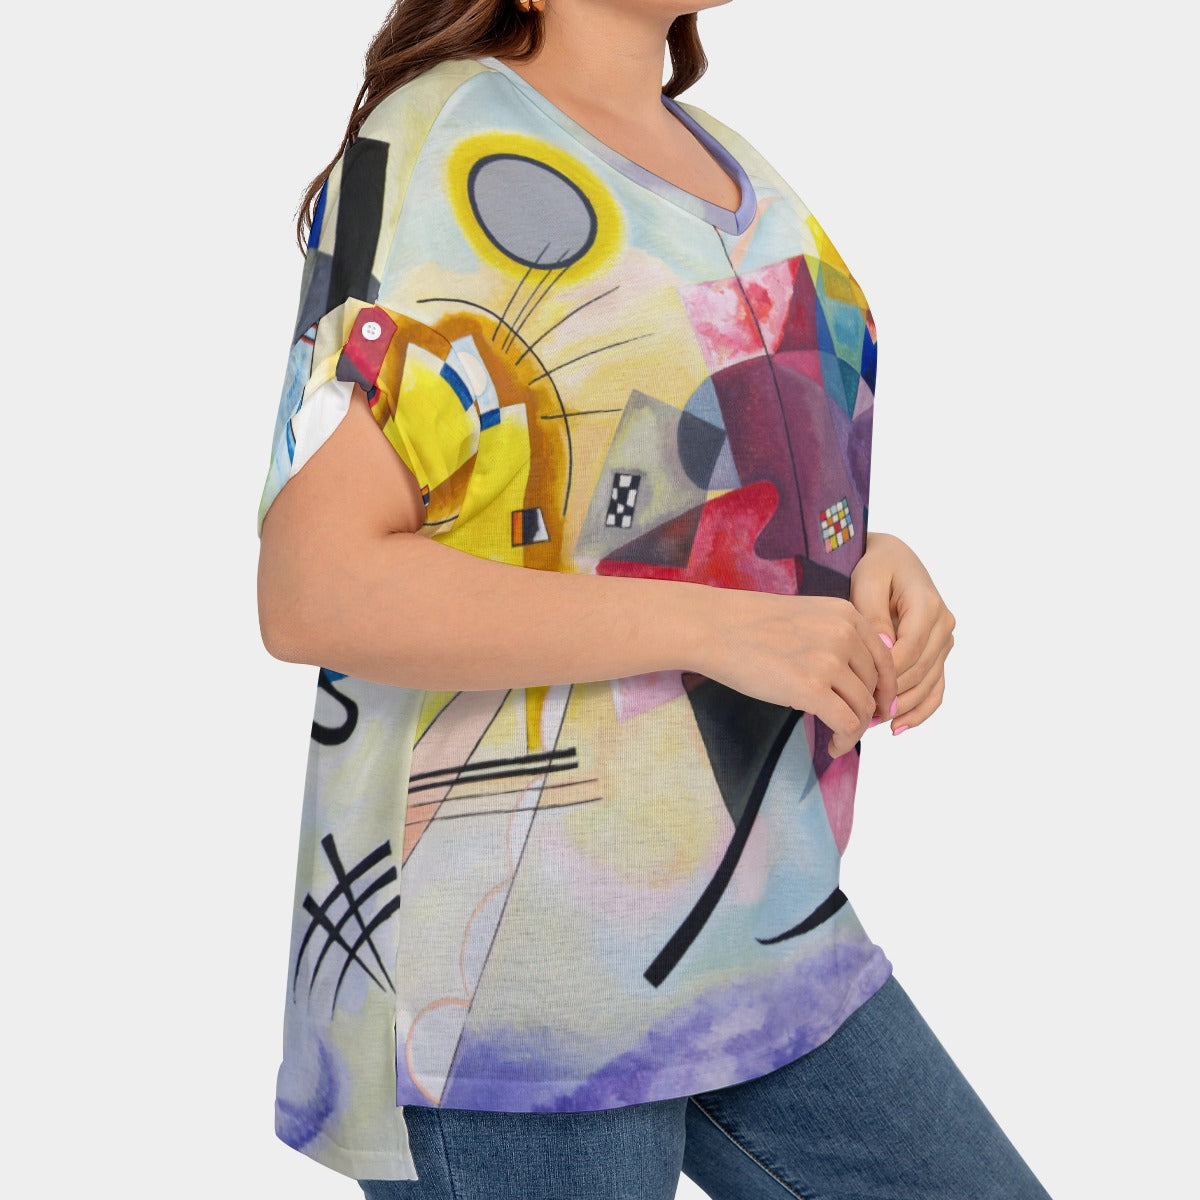 Plus size fashion with artistic flair